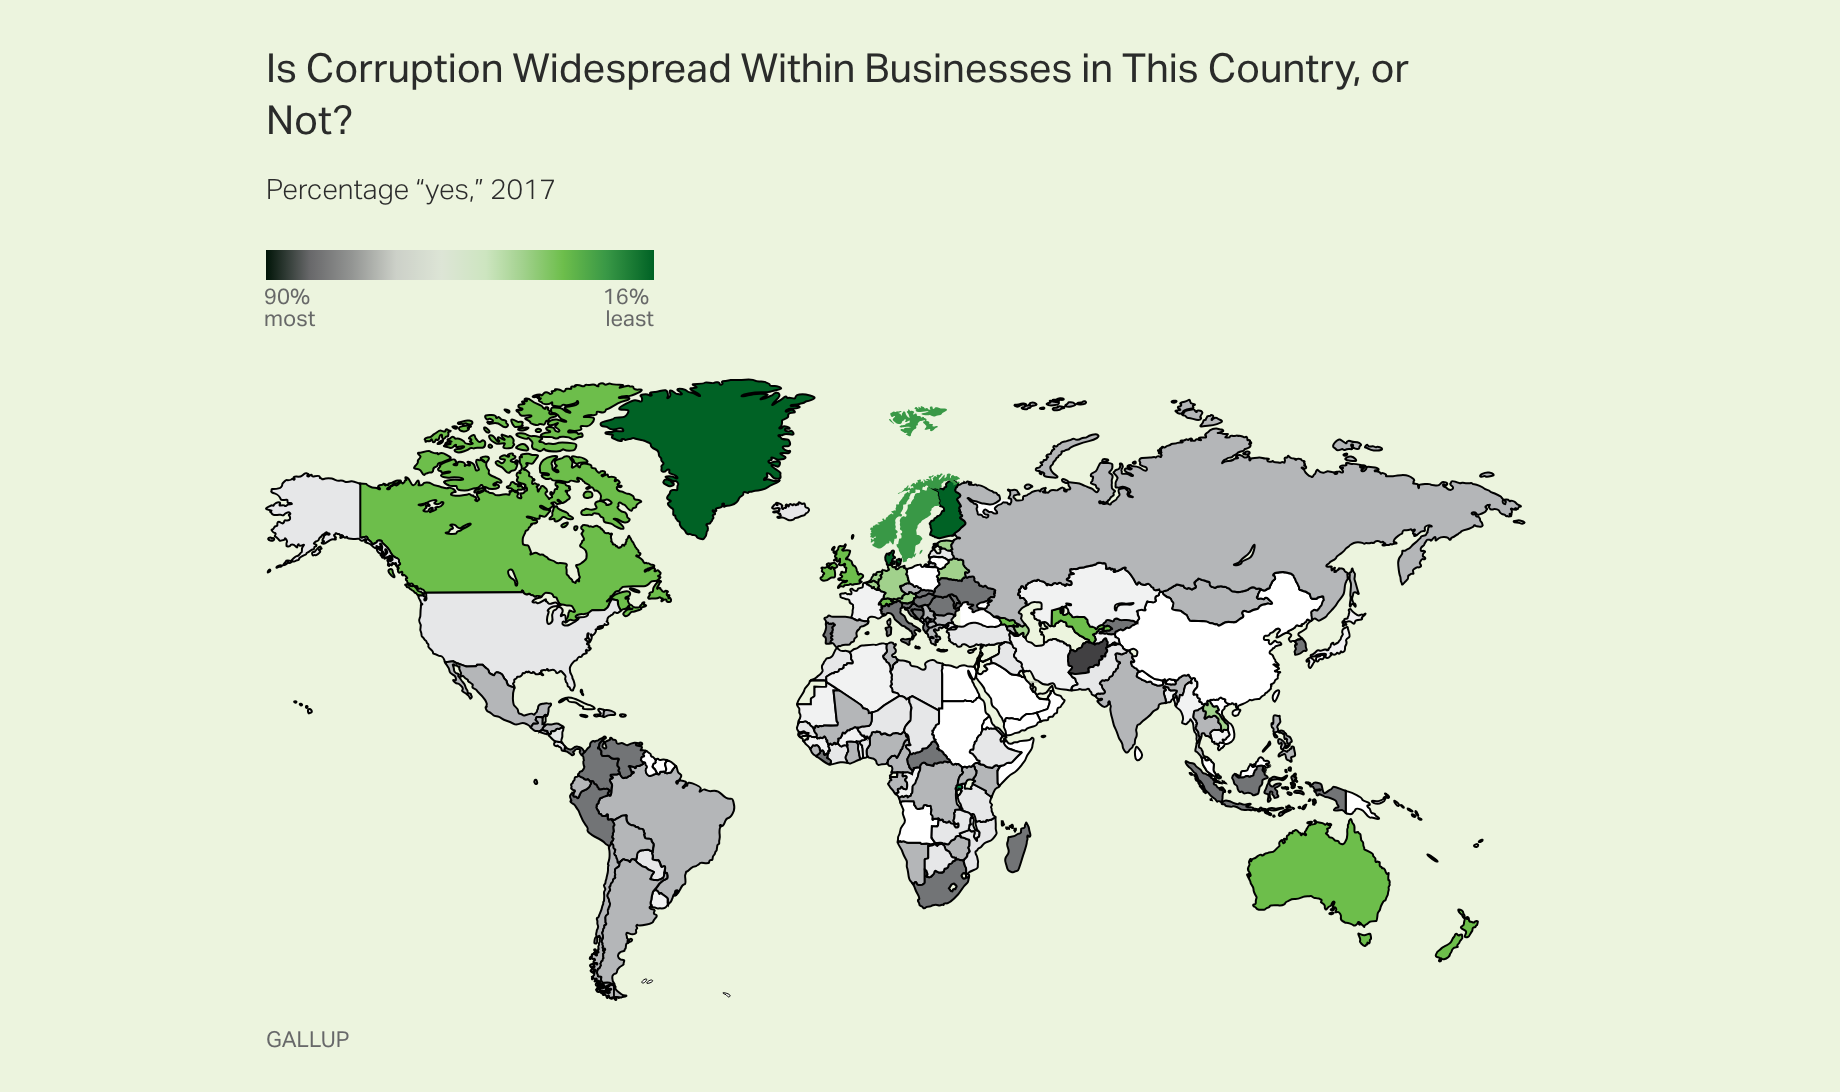 World map: Is corruption widespread within businesses in this country or not?